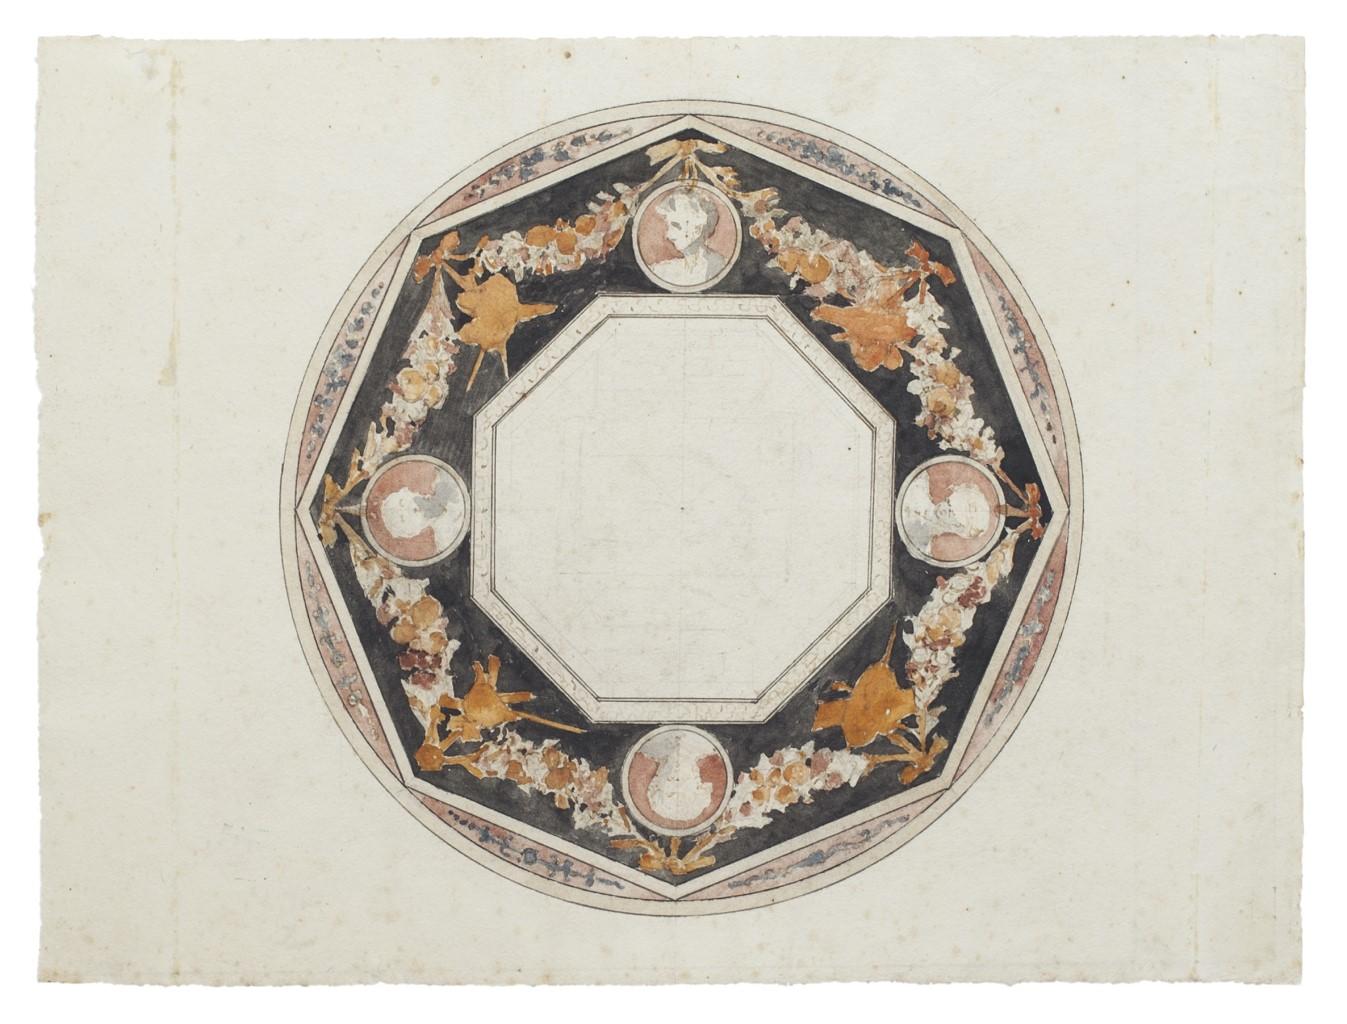 Ceiling Decoration - Original Ink and Watercolor - 18th Century